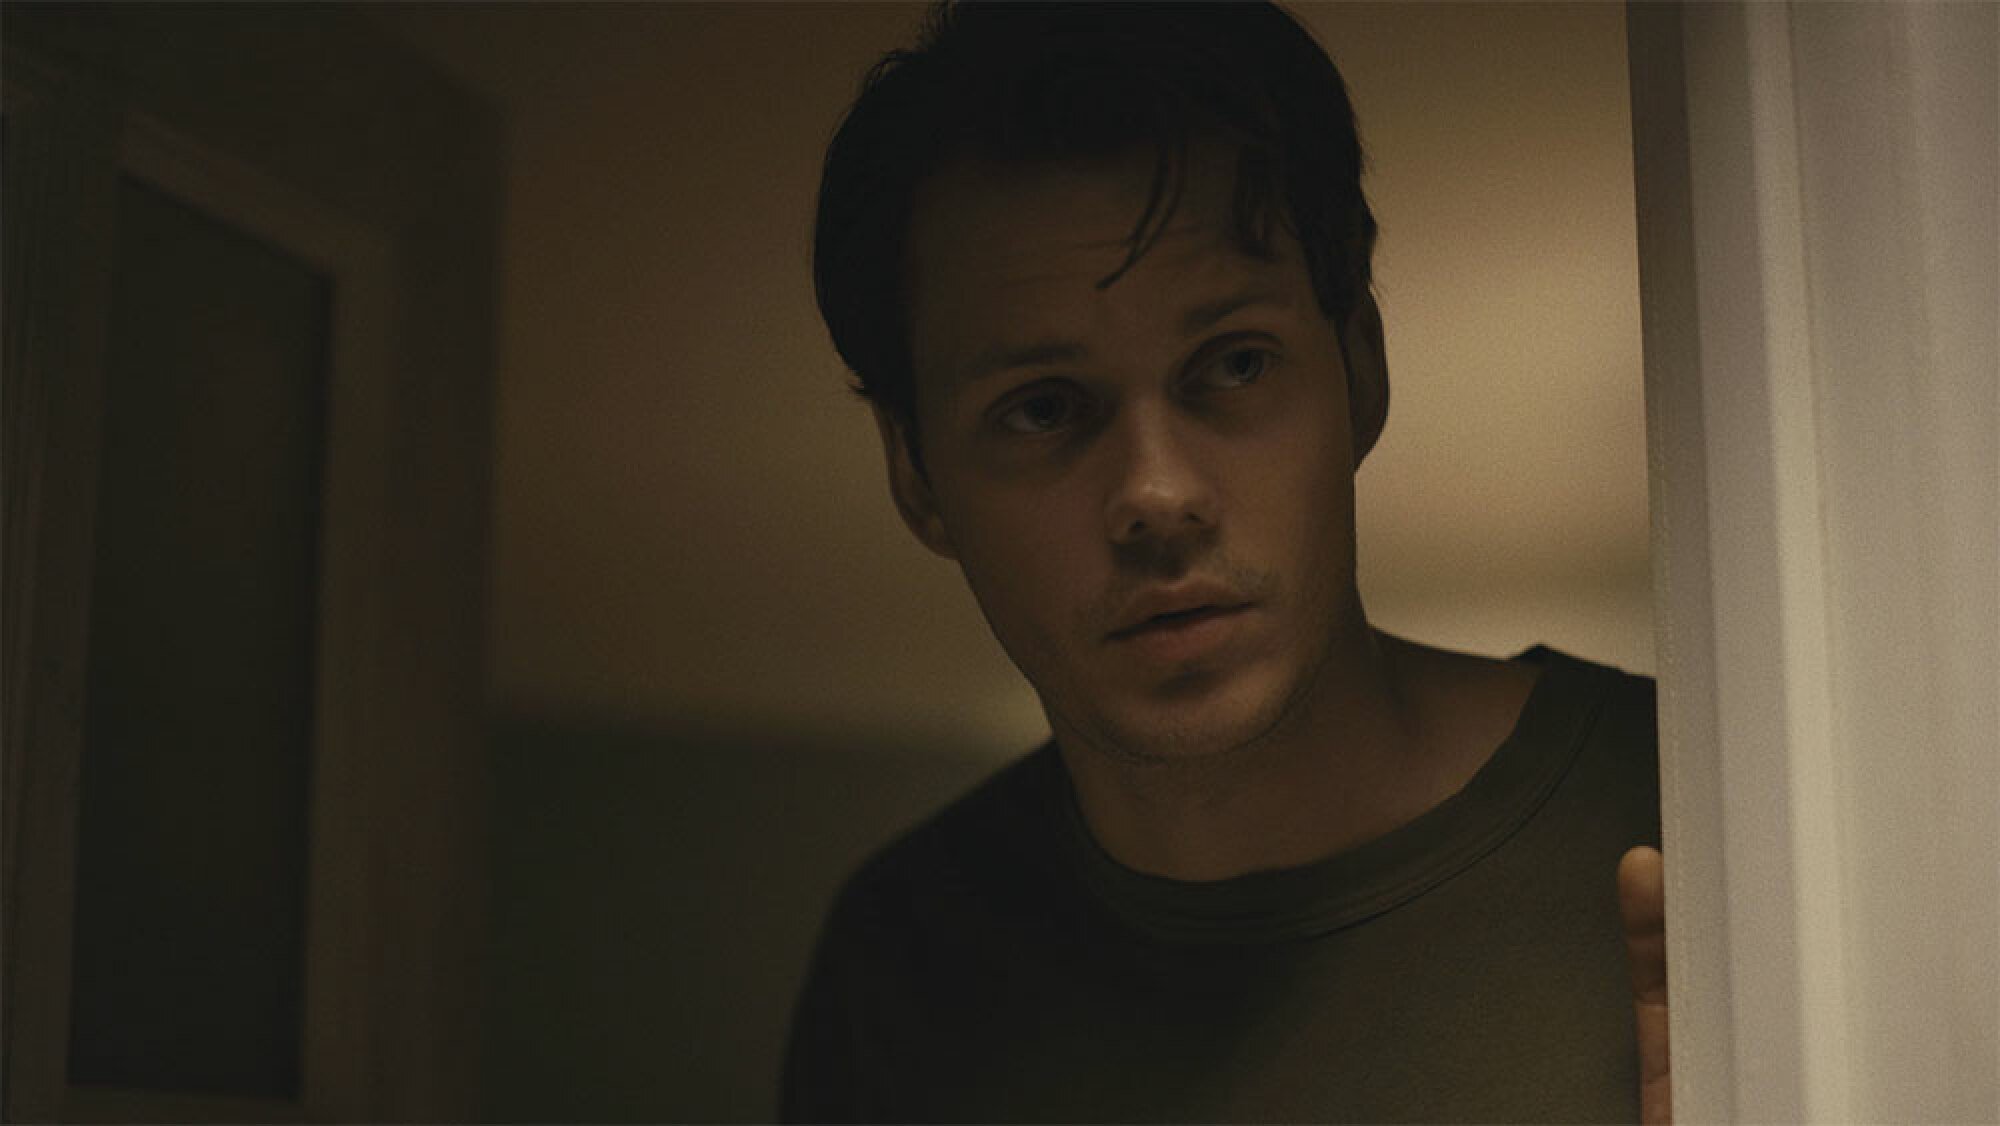 A dark-haired man stands in an open front door, peering out into the night.